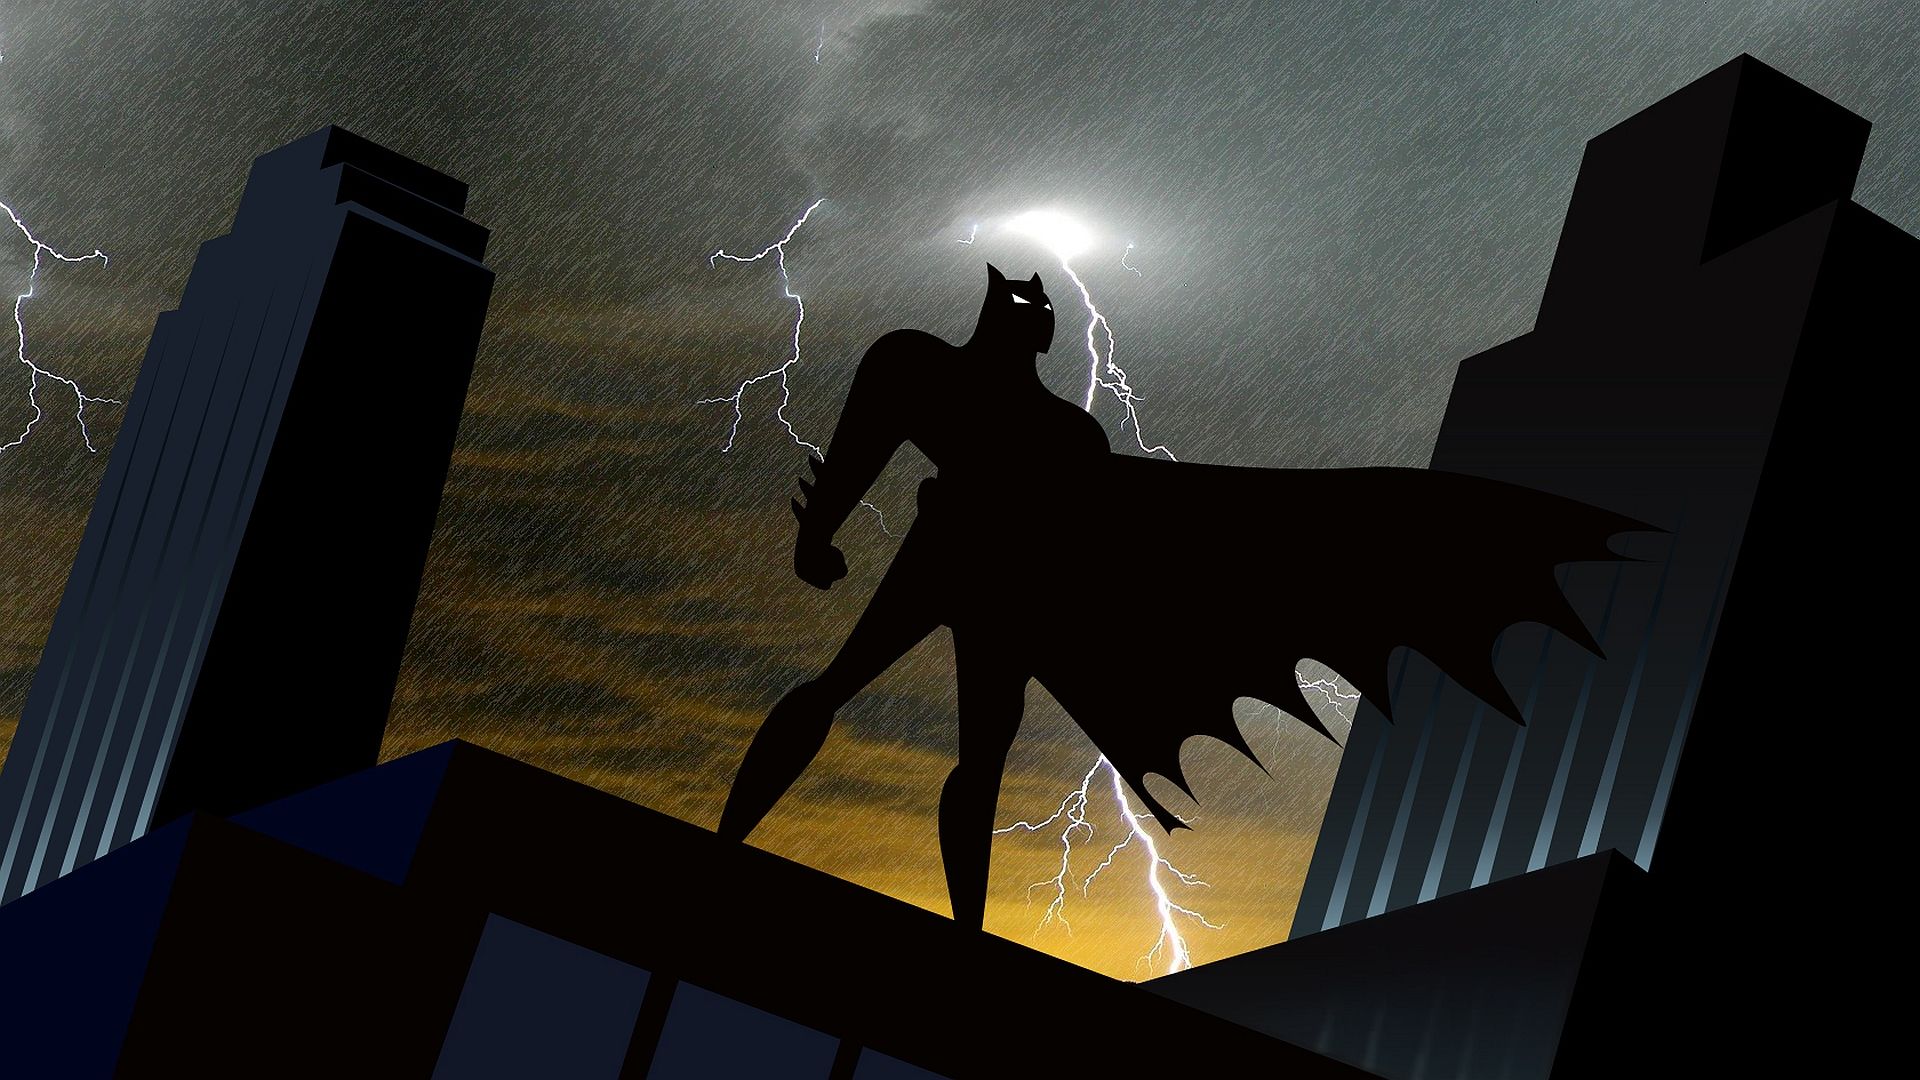 Batman The Animated Series HD Wallpapers for desktop download.